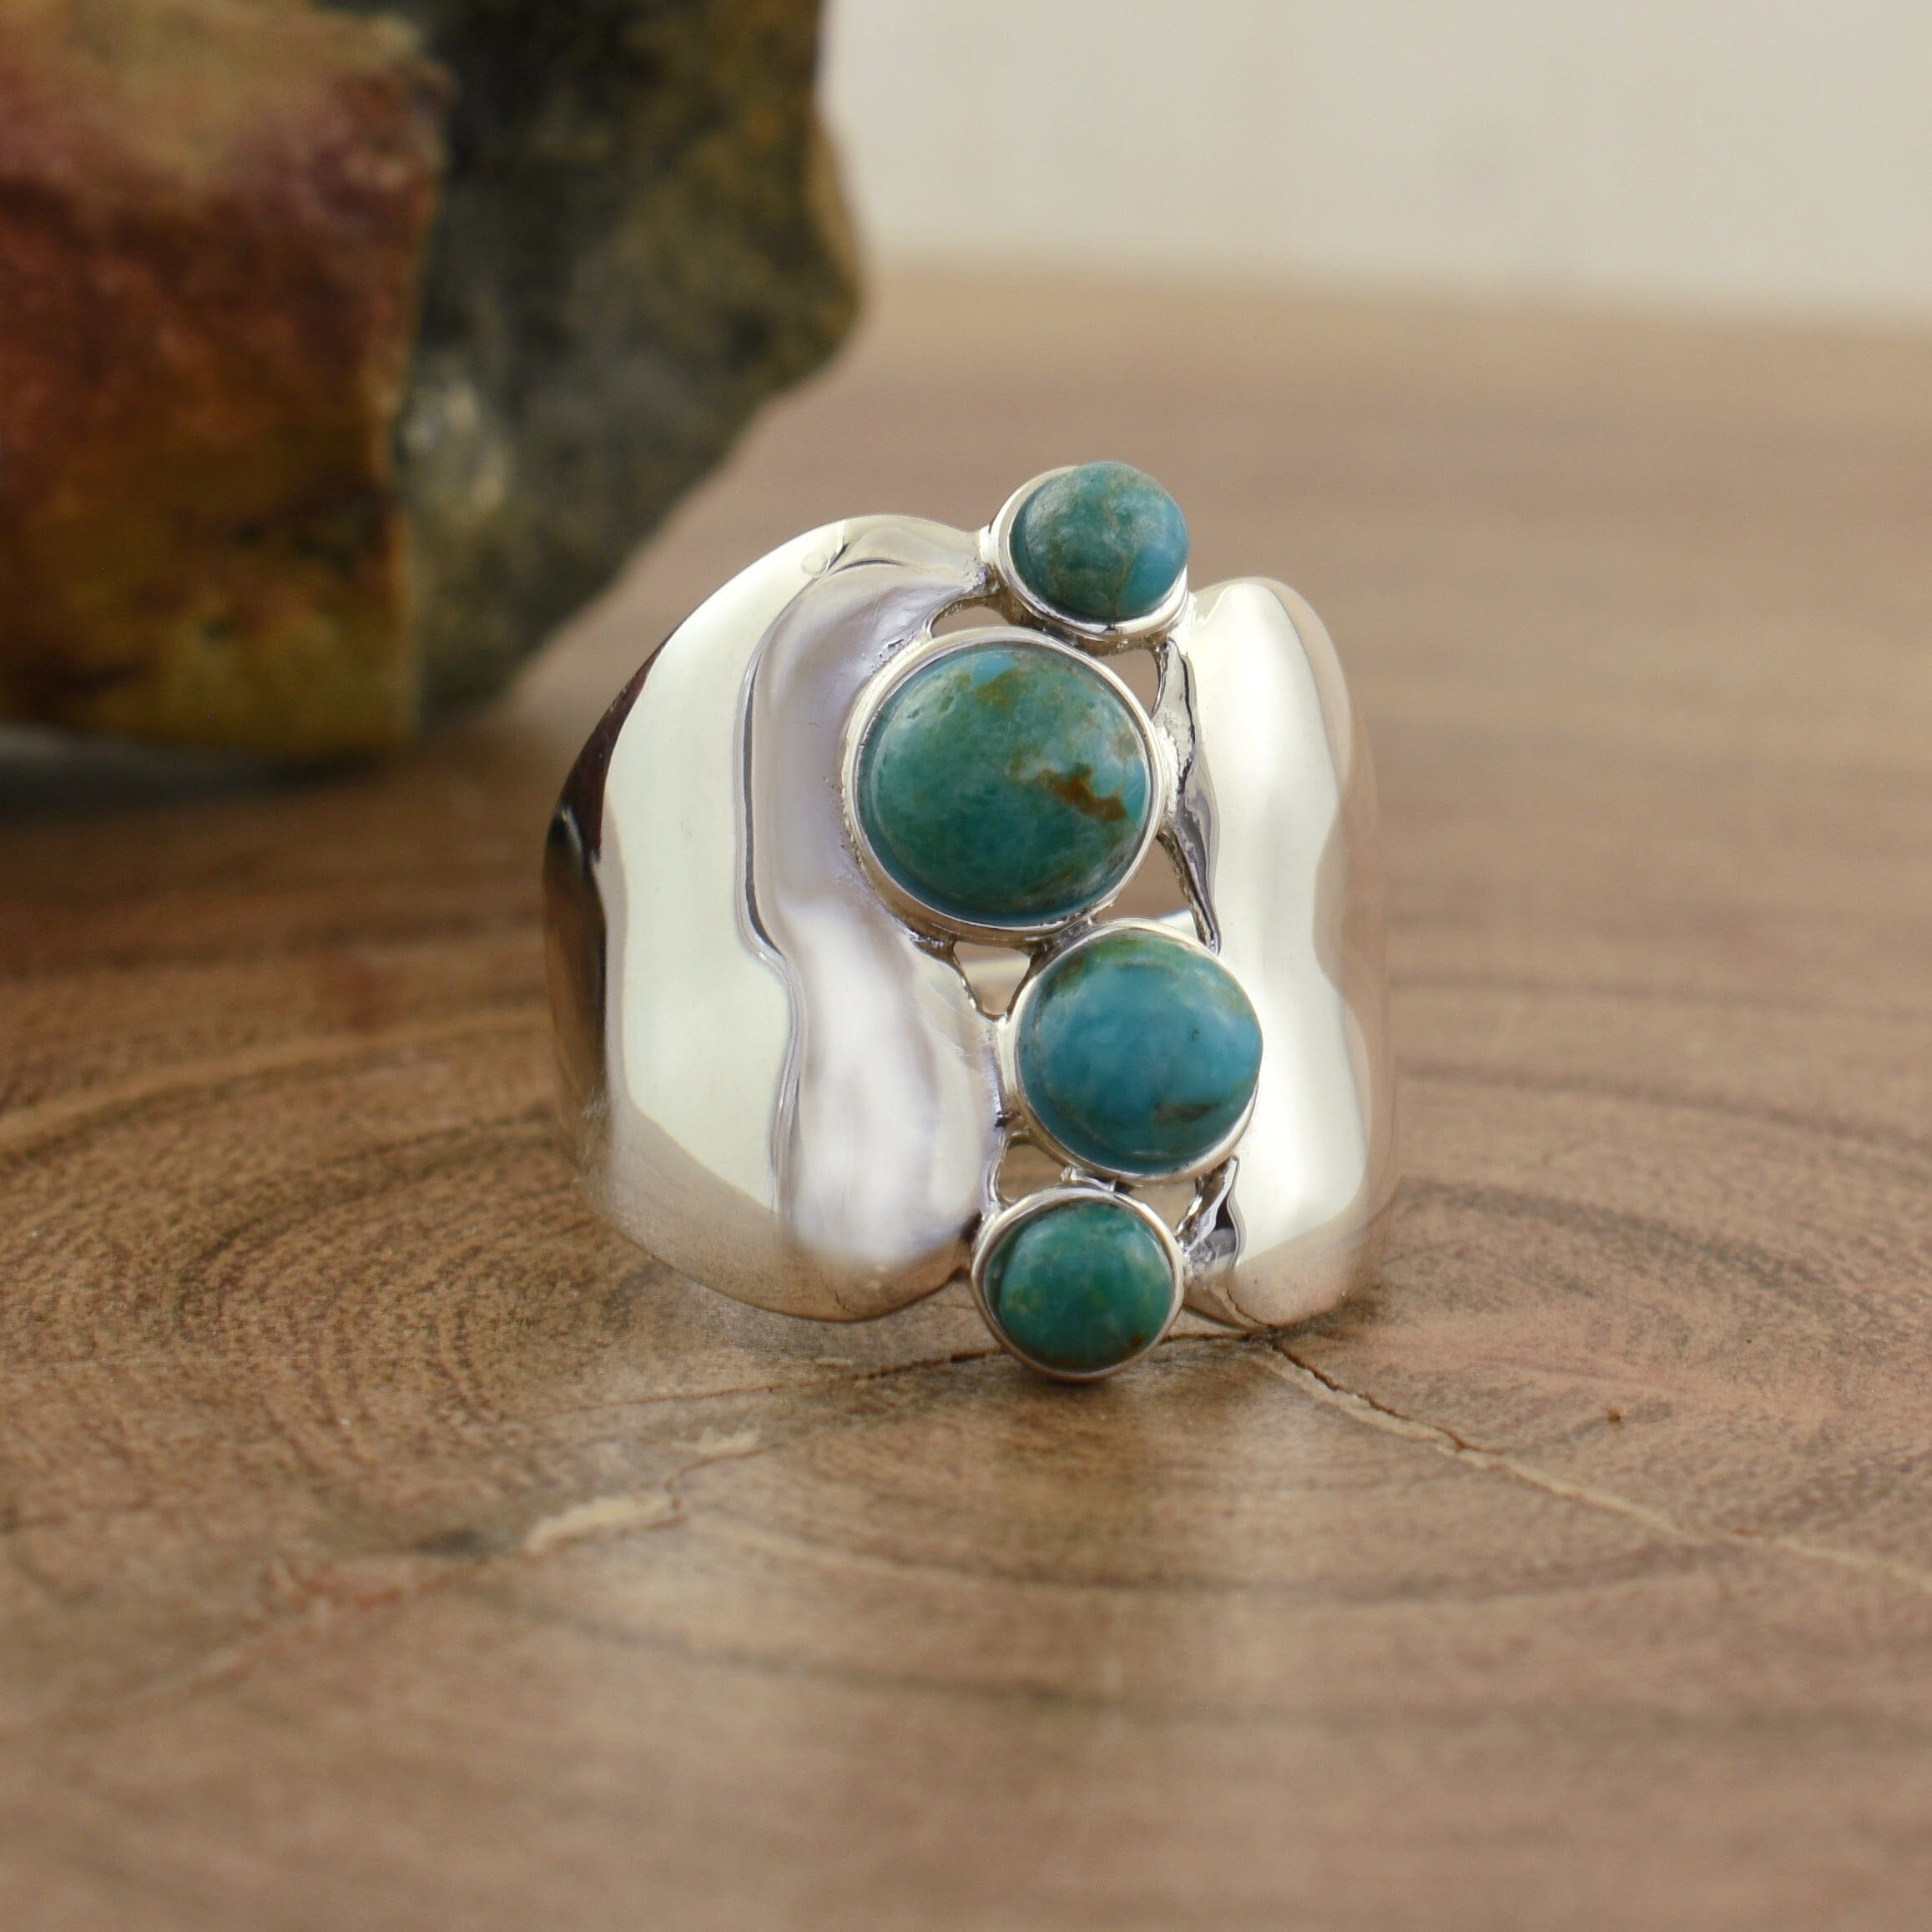 .925 sterling silver featuring four bezel set reconstructed turquoise stones